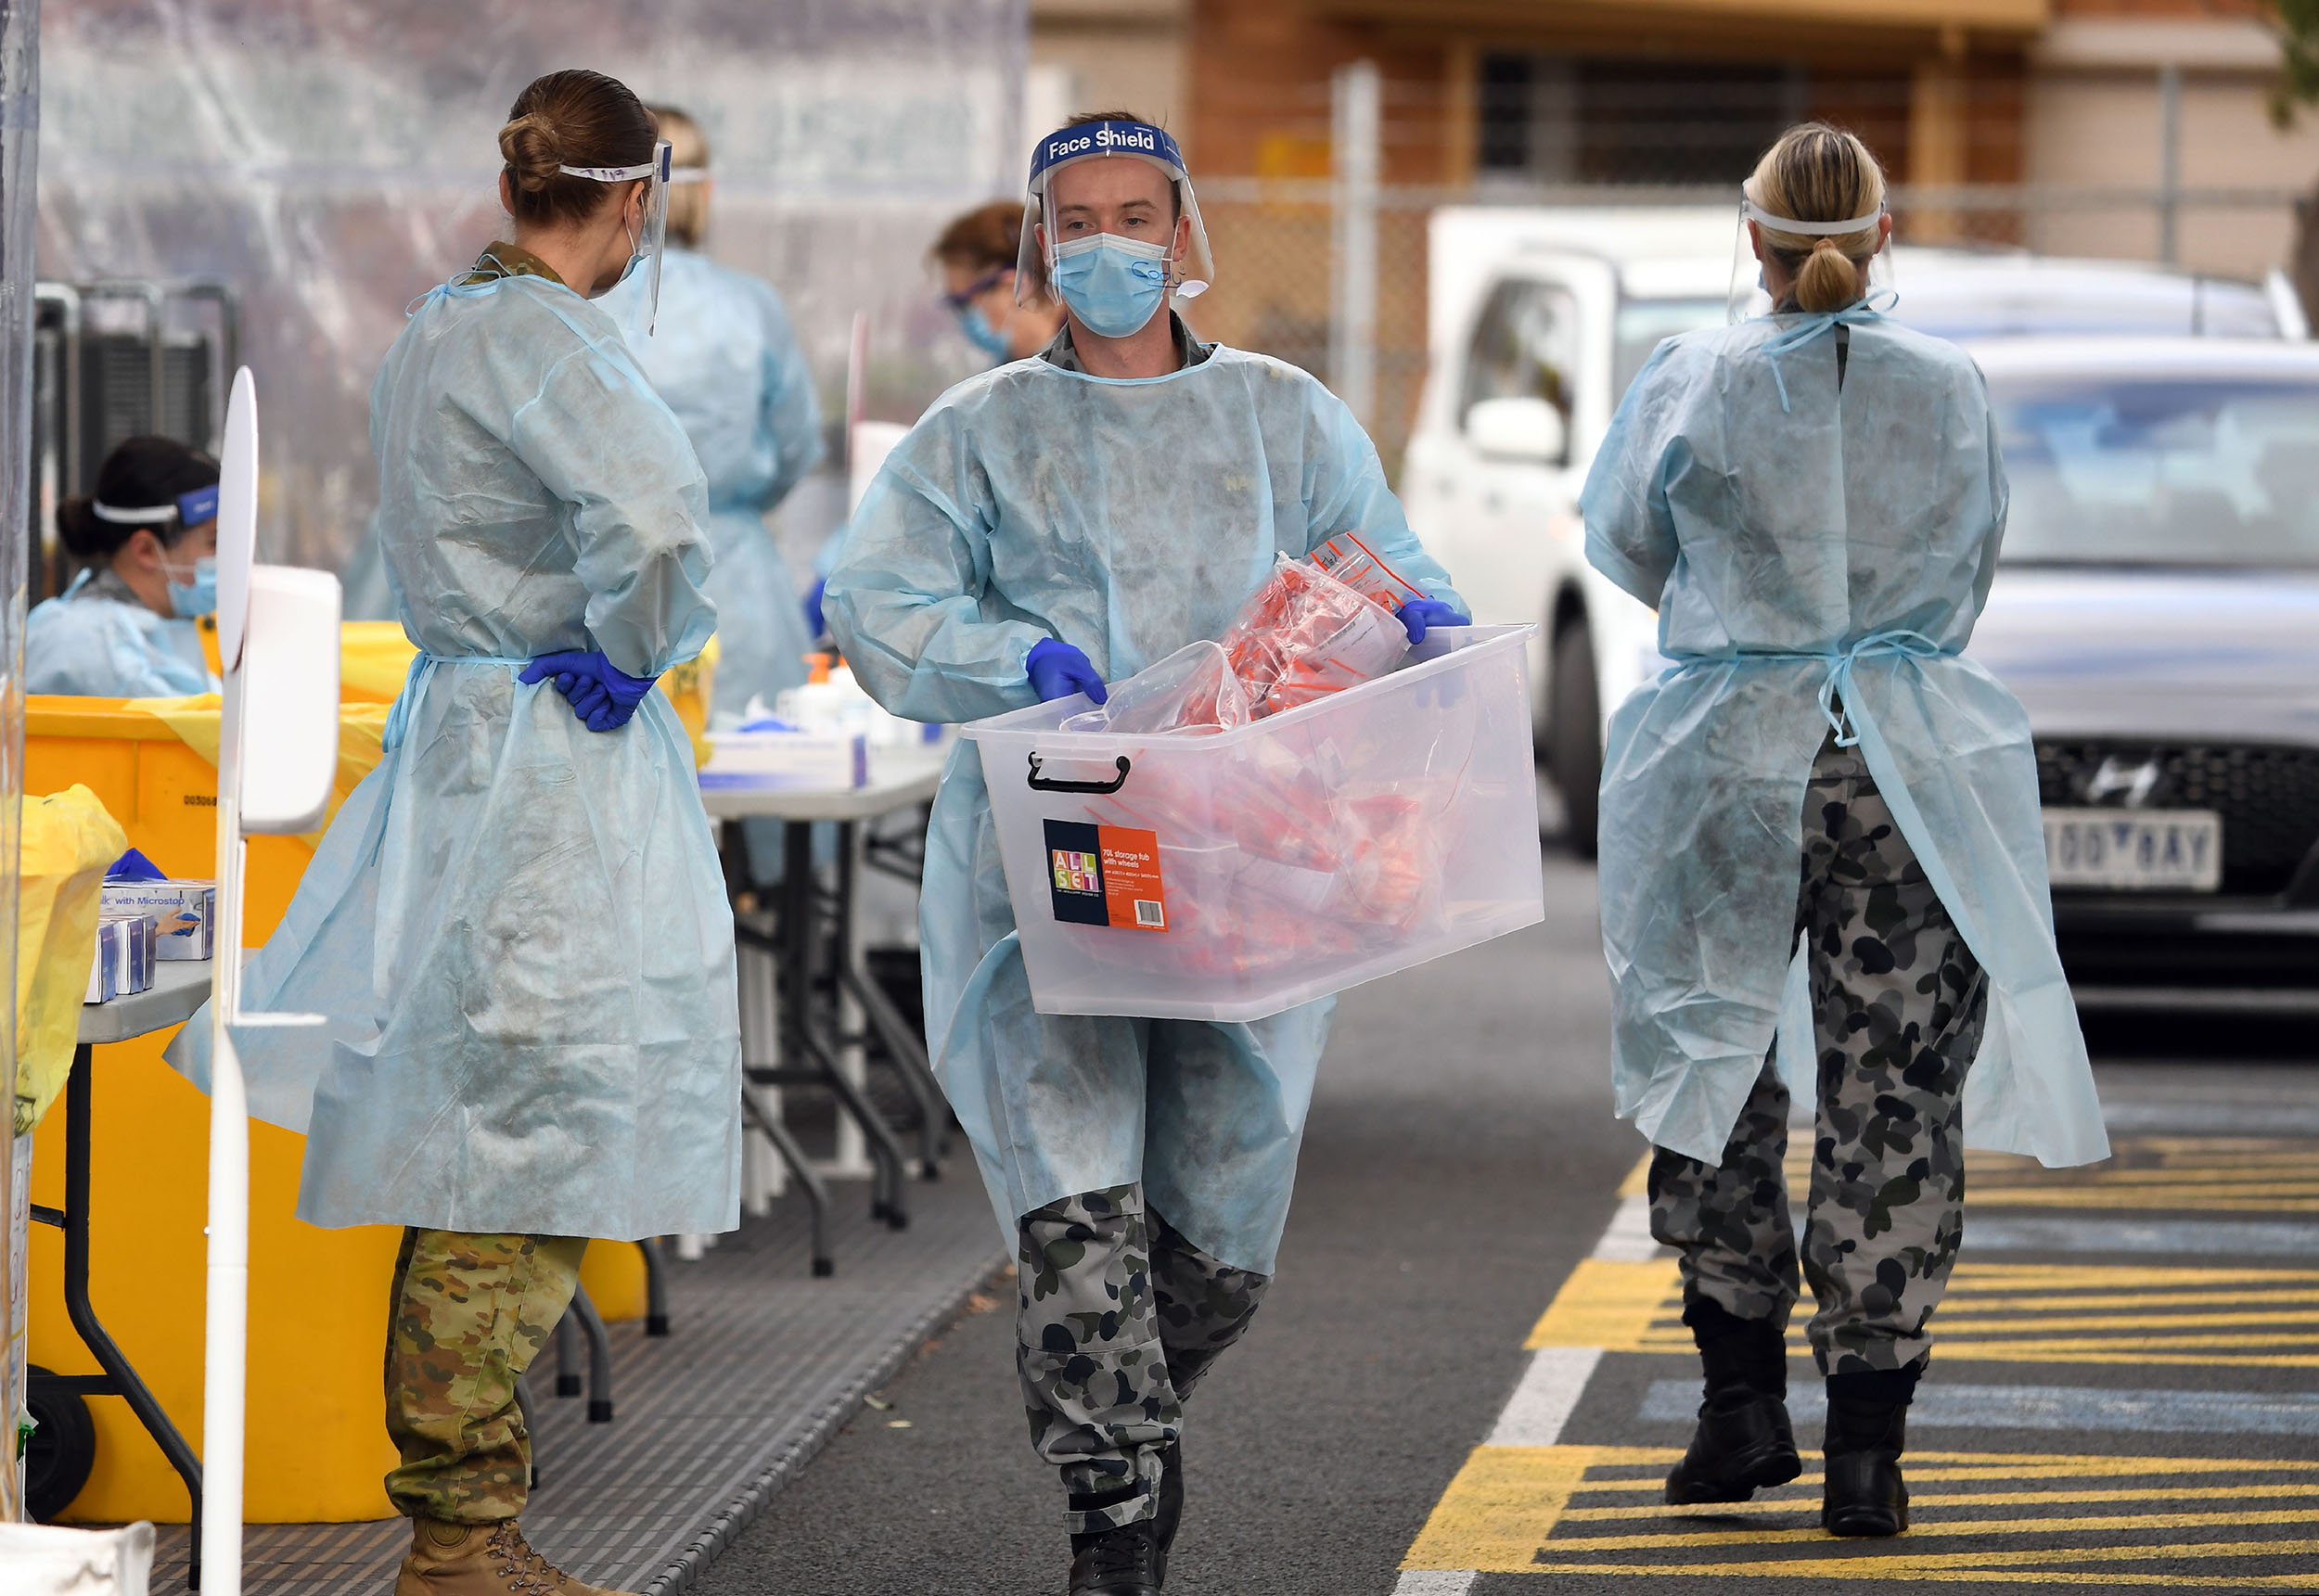 A member of the Australian Defence Force carries a batch of swab samples taken from members of the public at a drive-through coronavirus testing station in the Melbourne suburb of Fawkner on July 2.